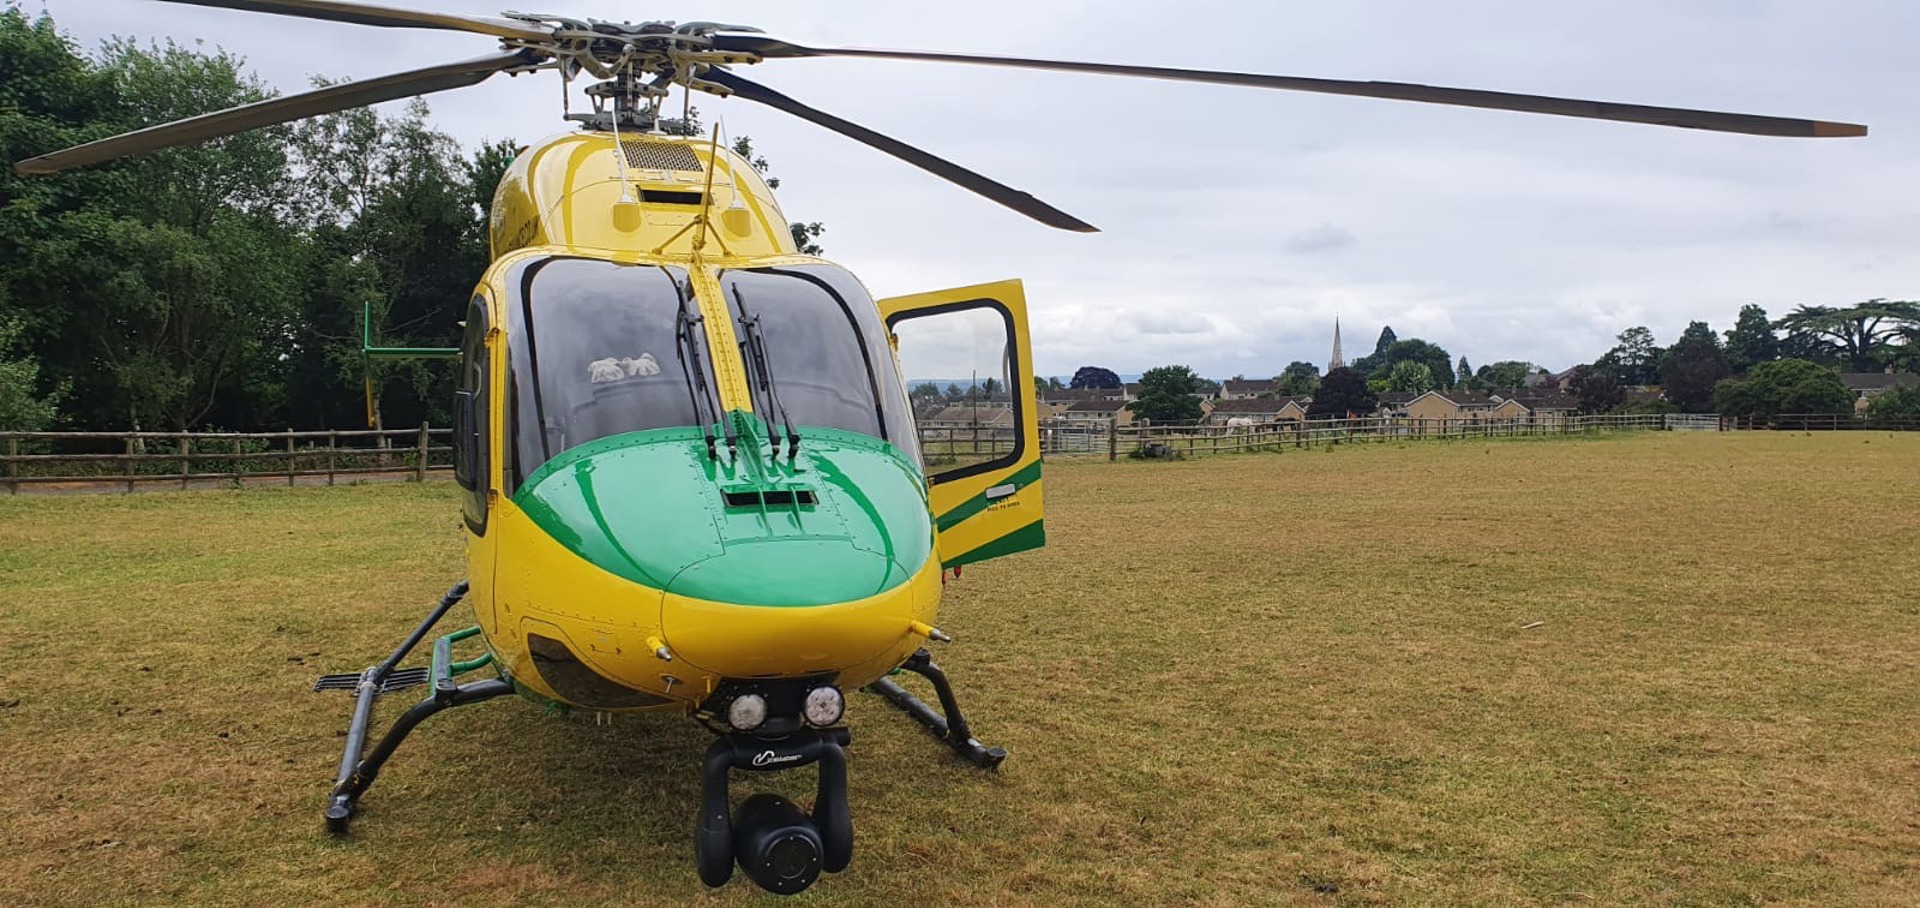 Wiltshire Air Ambulance's helicopter landed in Bradford On Avon